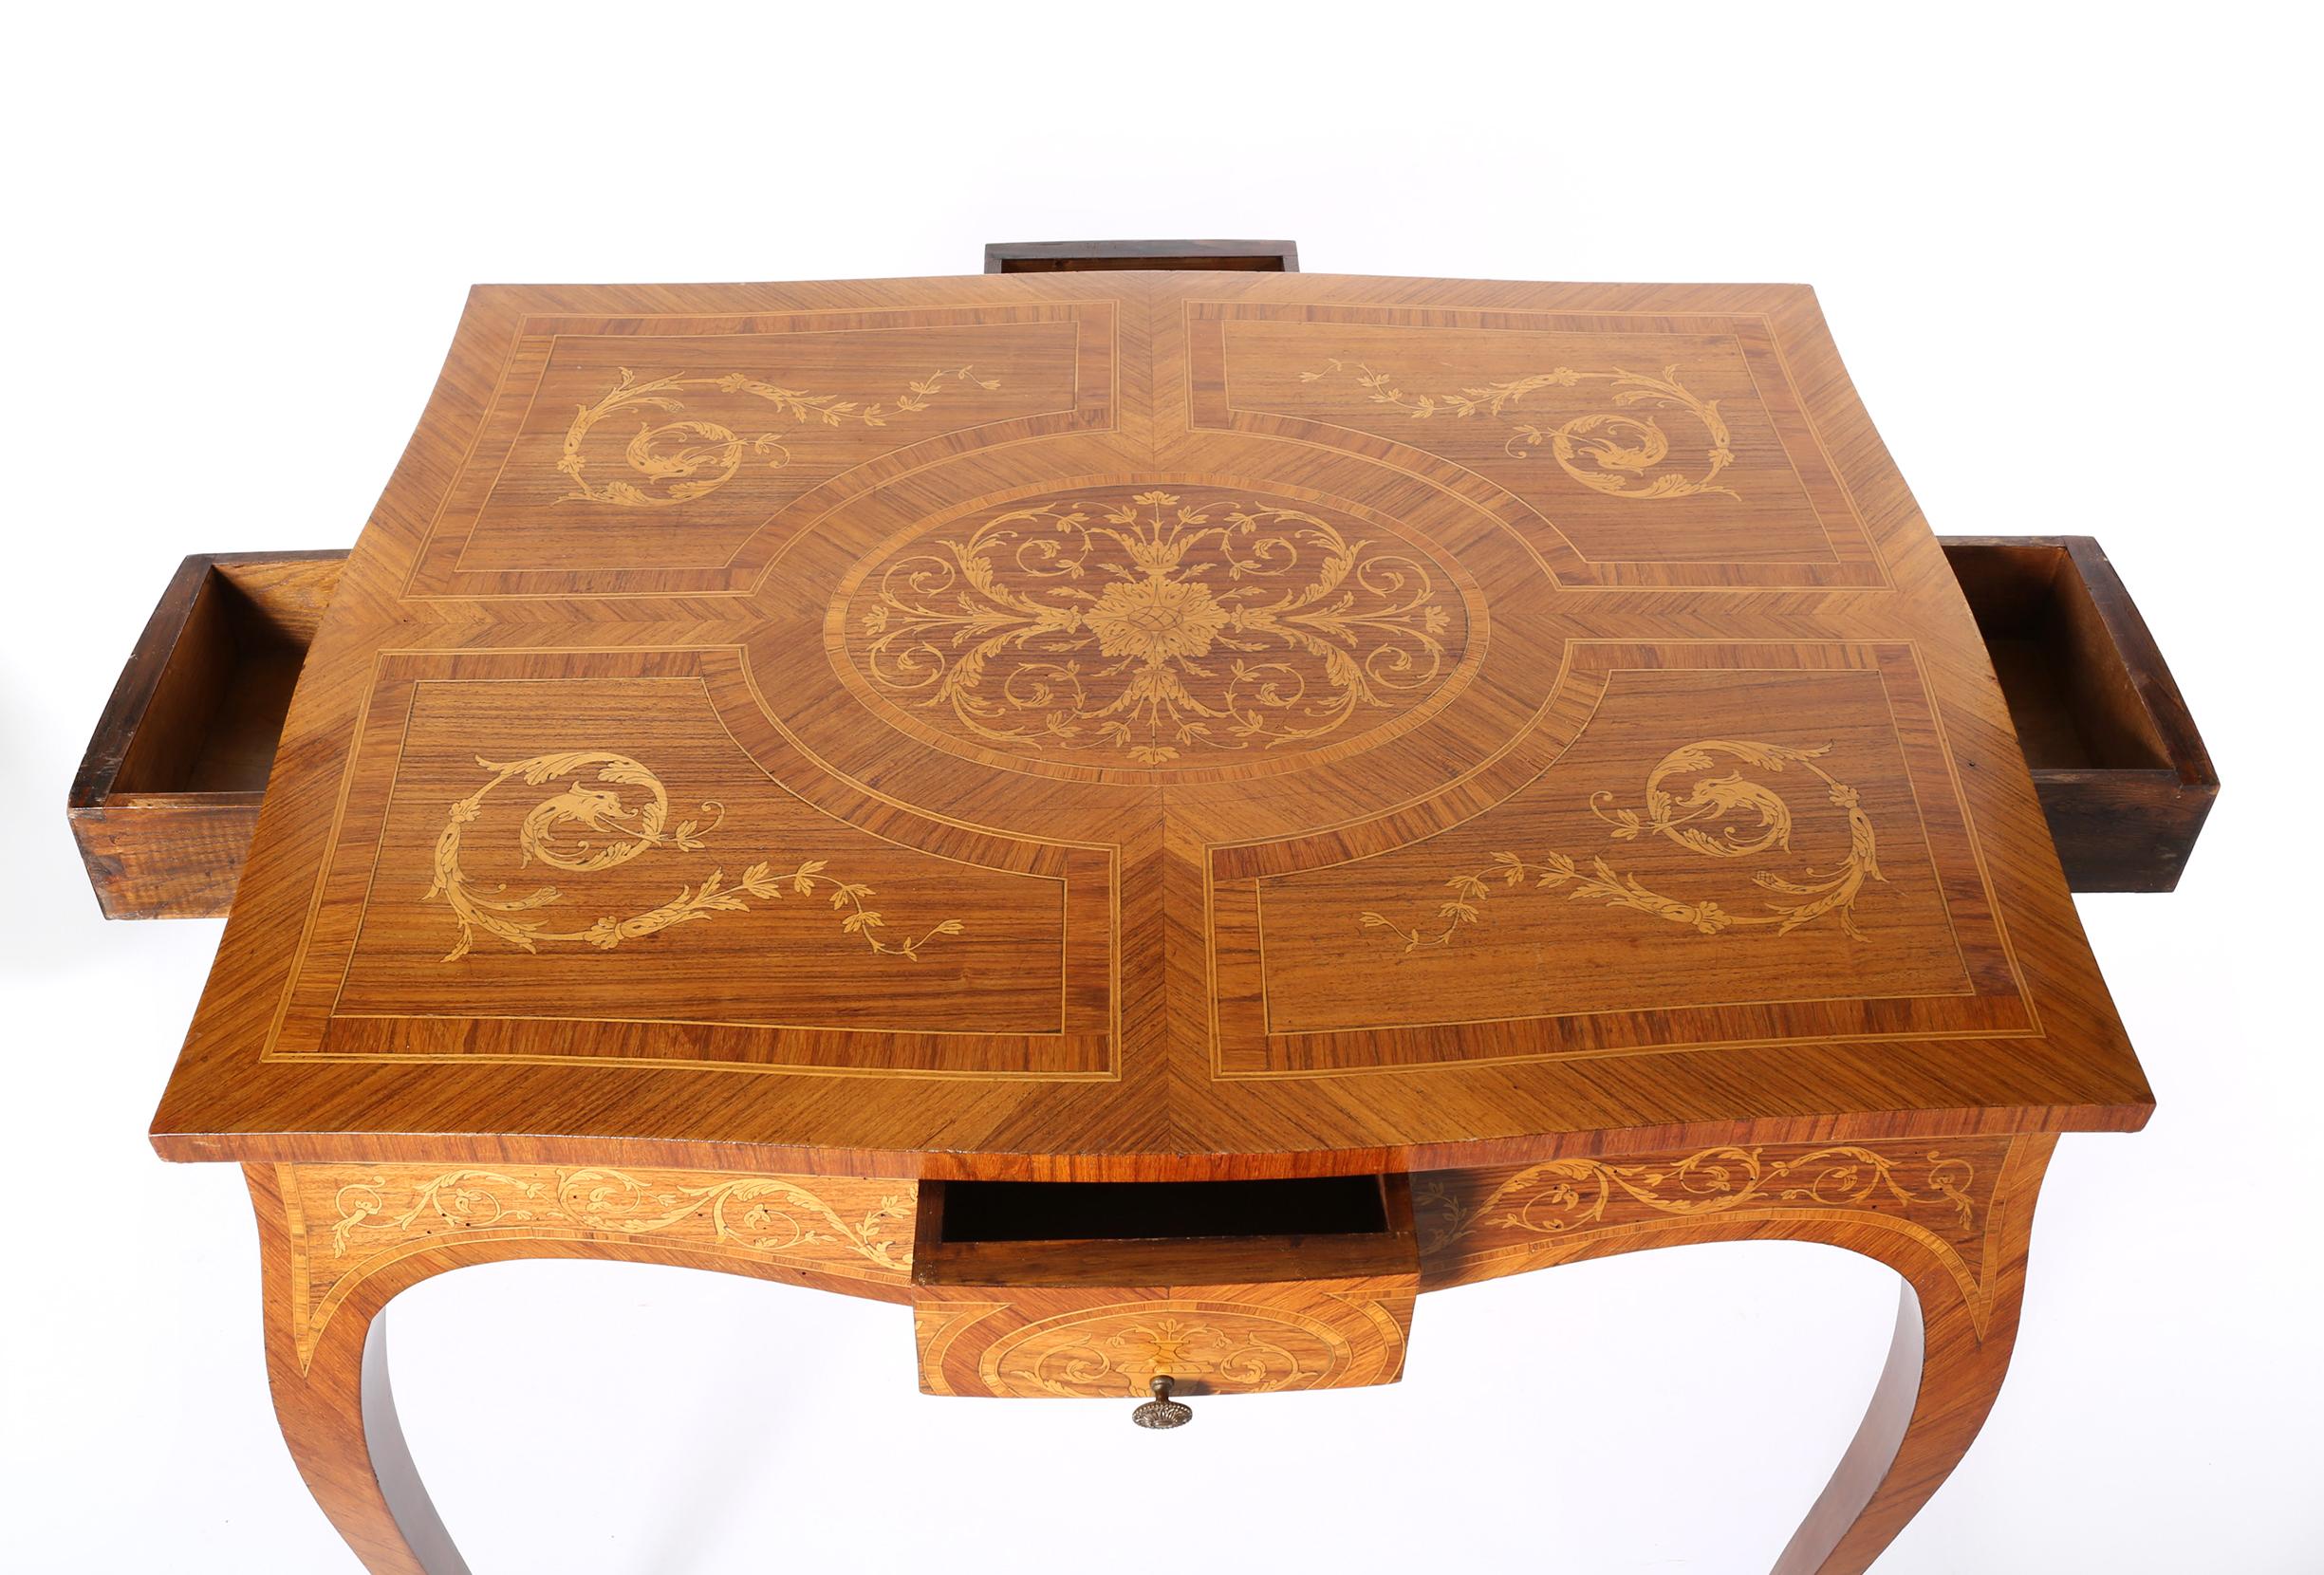 Wood Mid-19th Century Dutch Marquetry Center Table